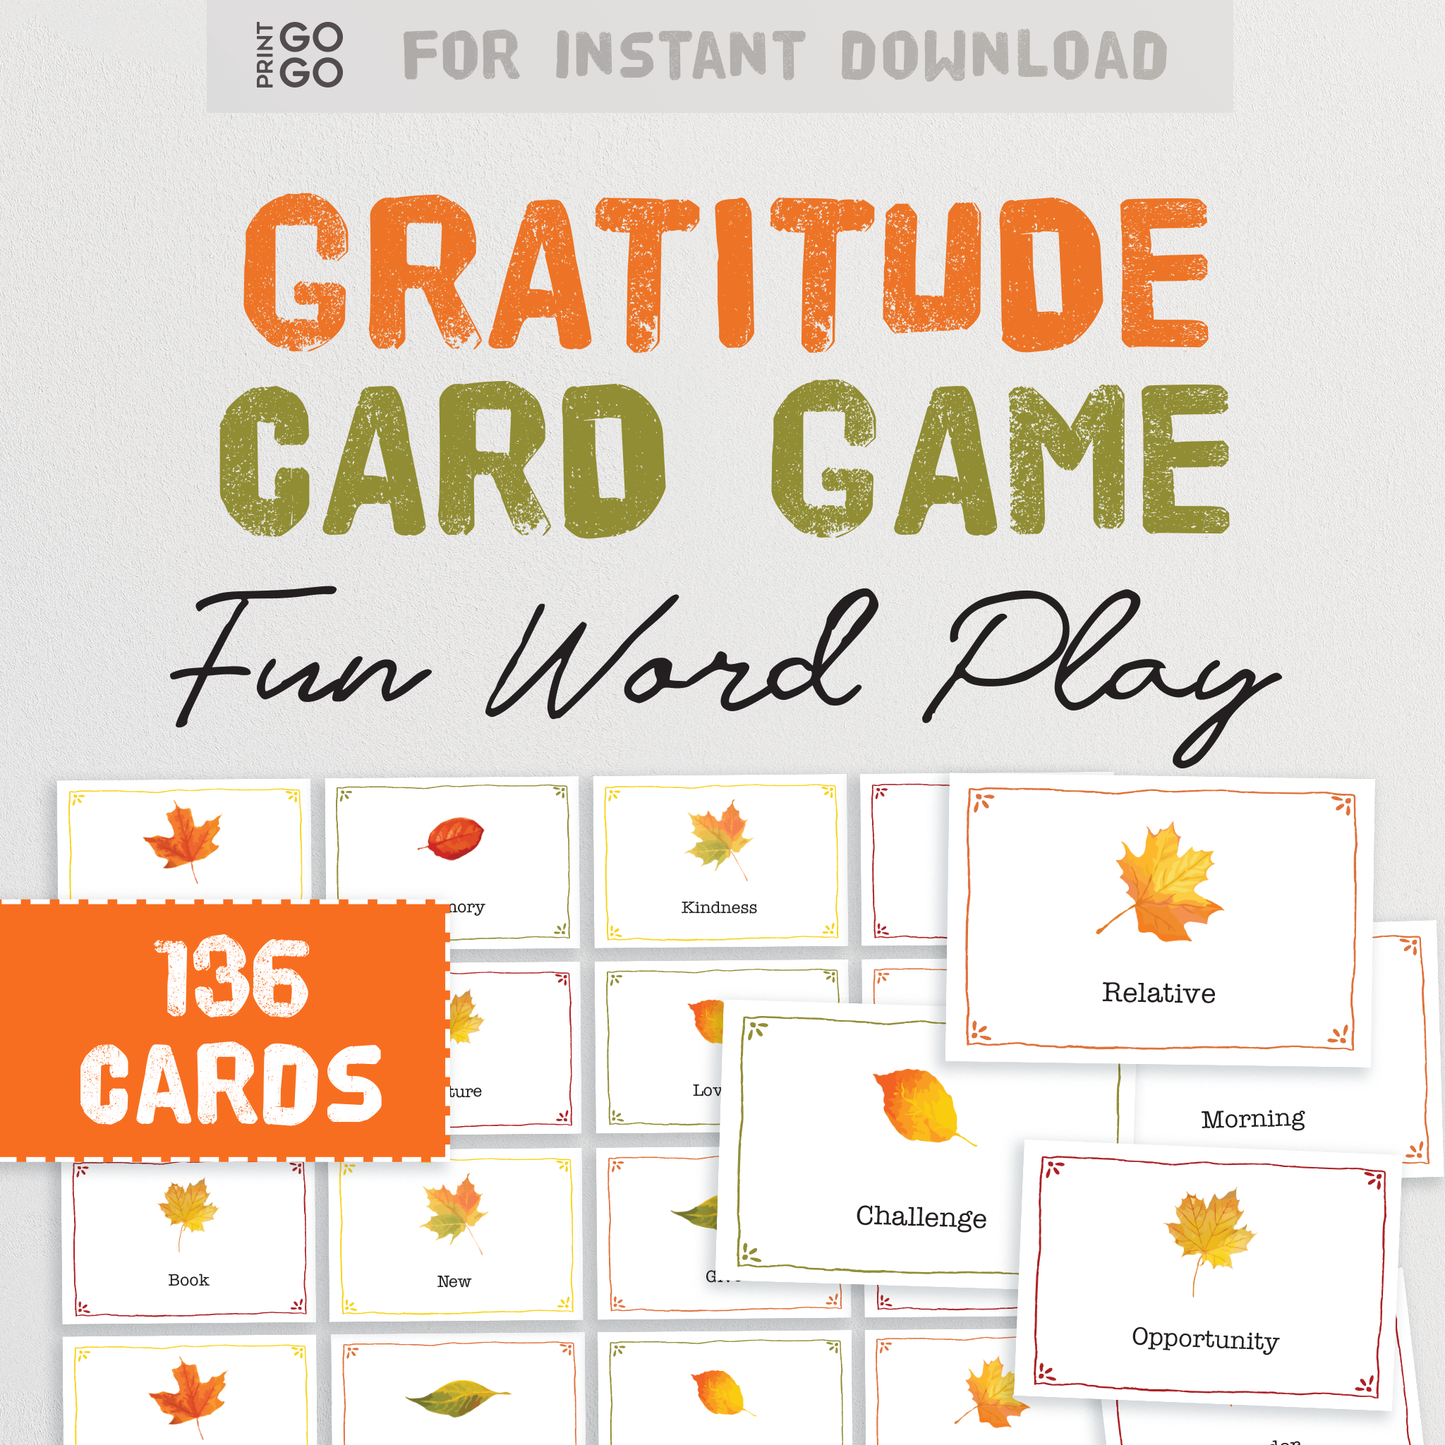 Gratitude Conversation Starters - 136 Cards to Spark Conversation, Creativity and Practise Gratitude | Dinner Table Thanksgiving Activity